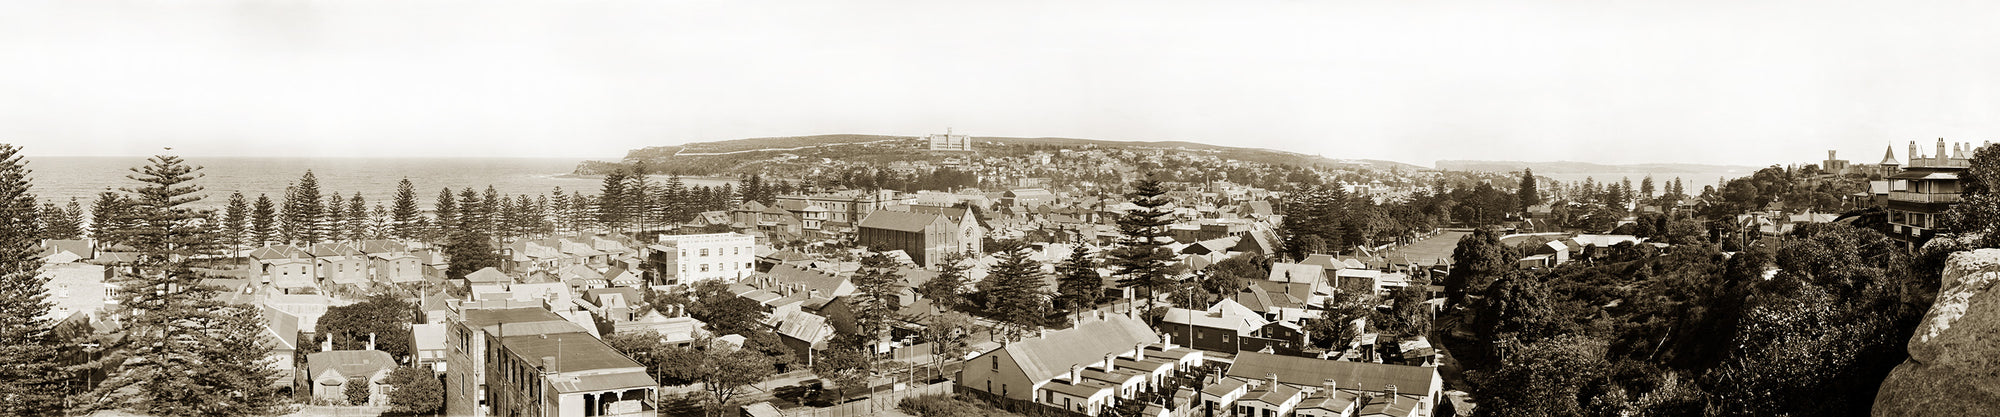 View From Kangaroo Hill Looking South, Manly NSW Australia 1920s